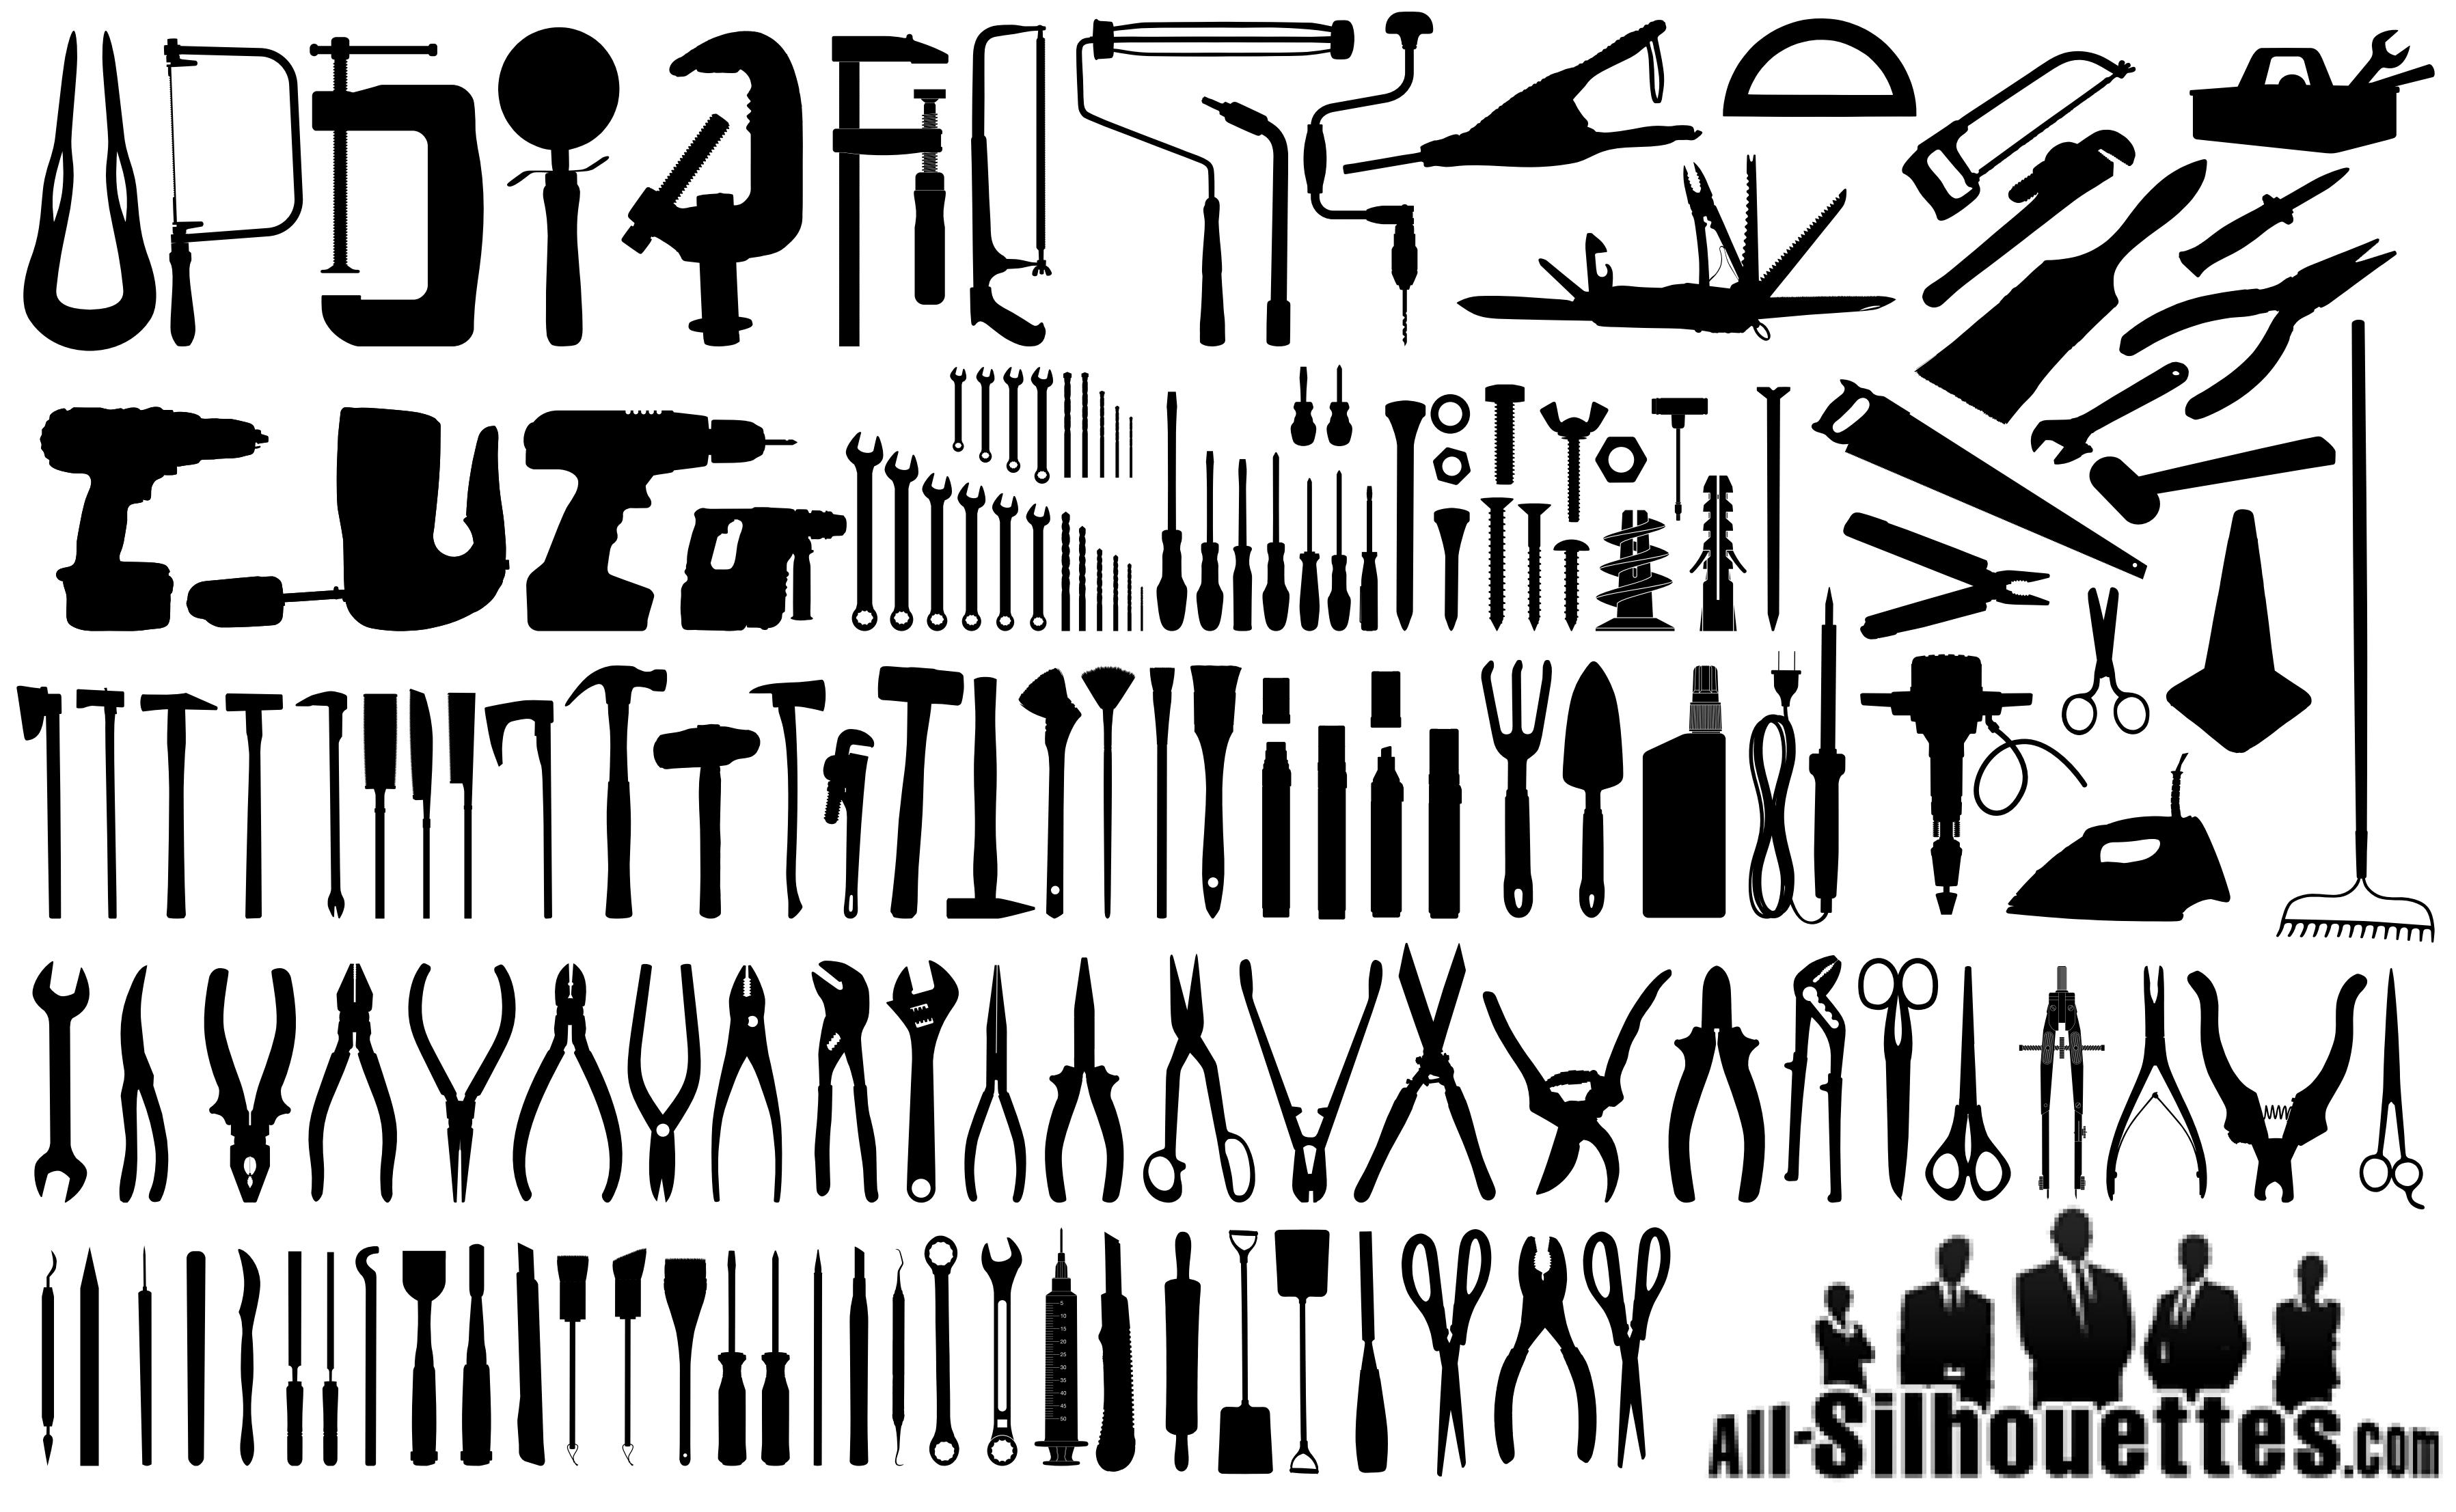 Tools, Instruments and Equipment Silhouettes